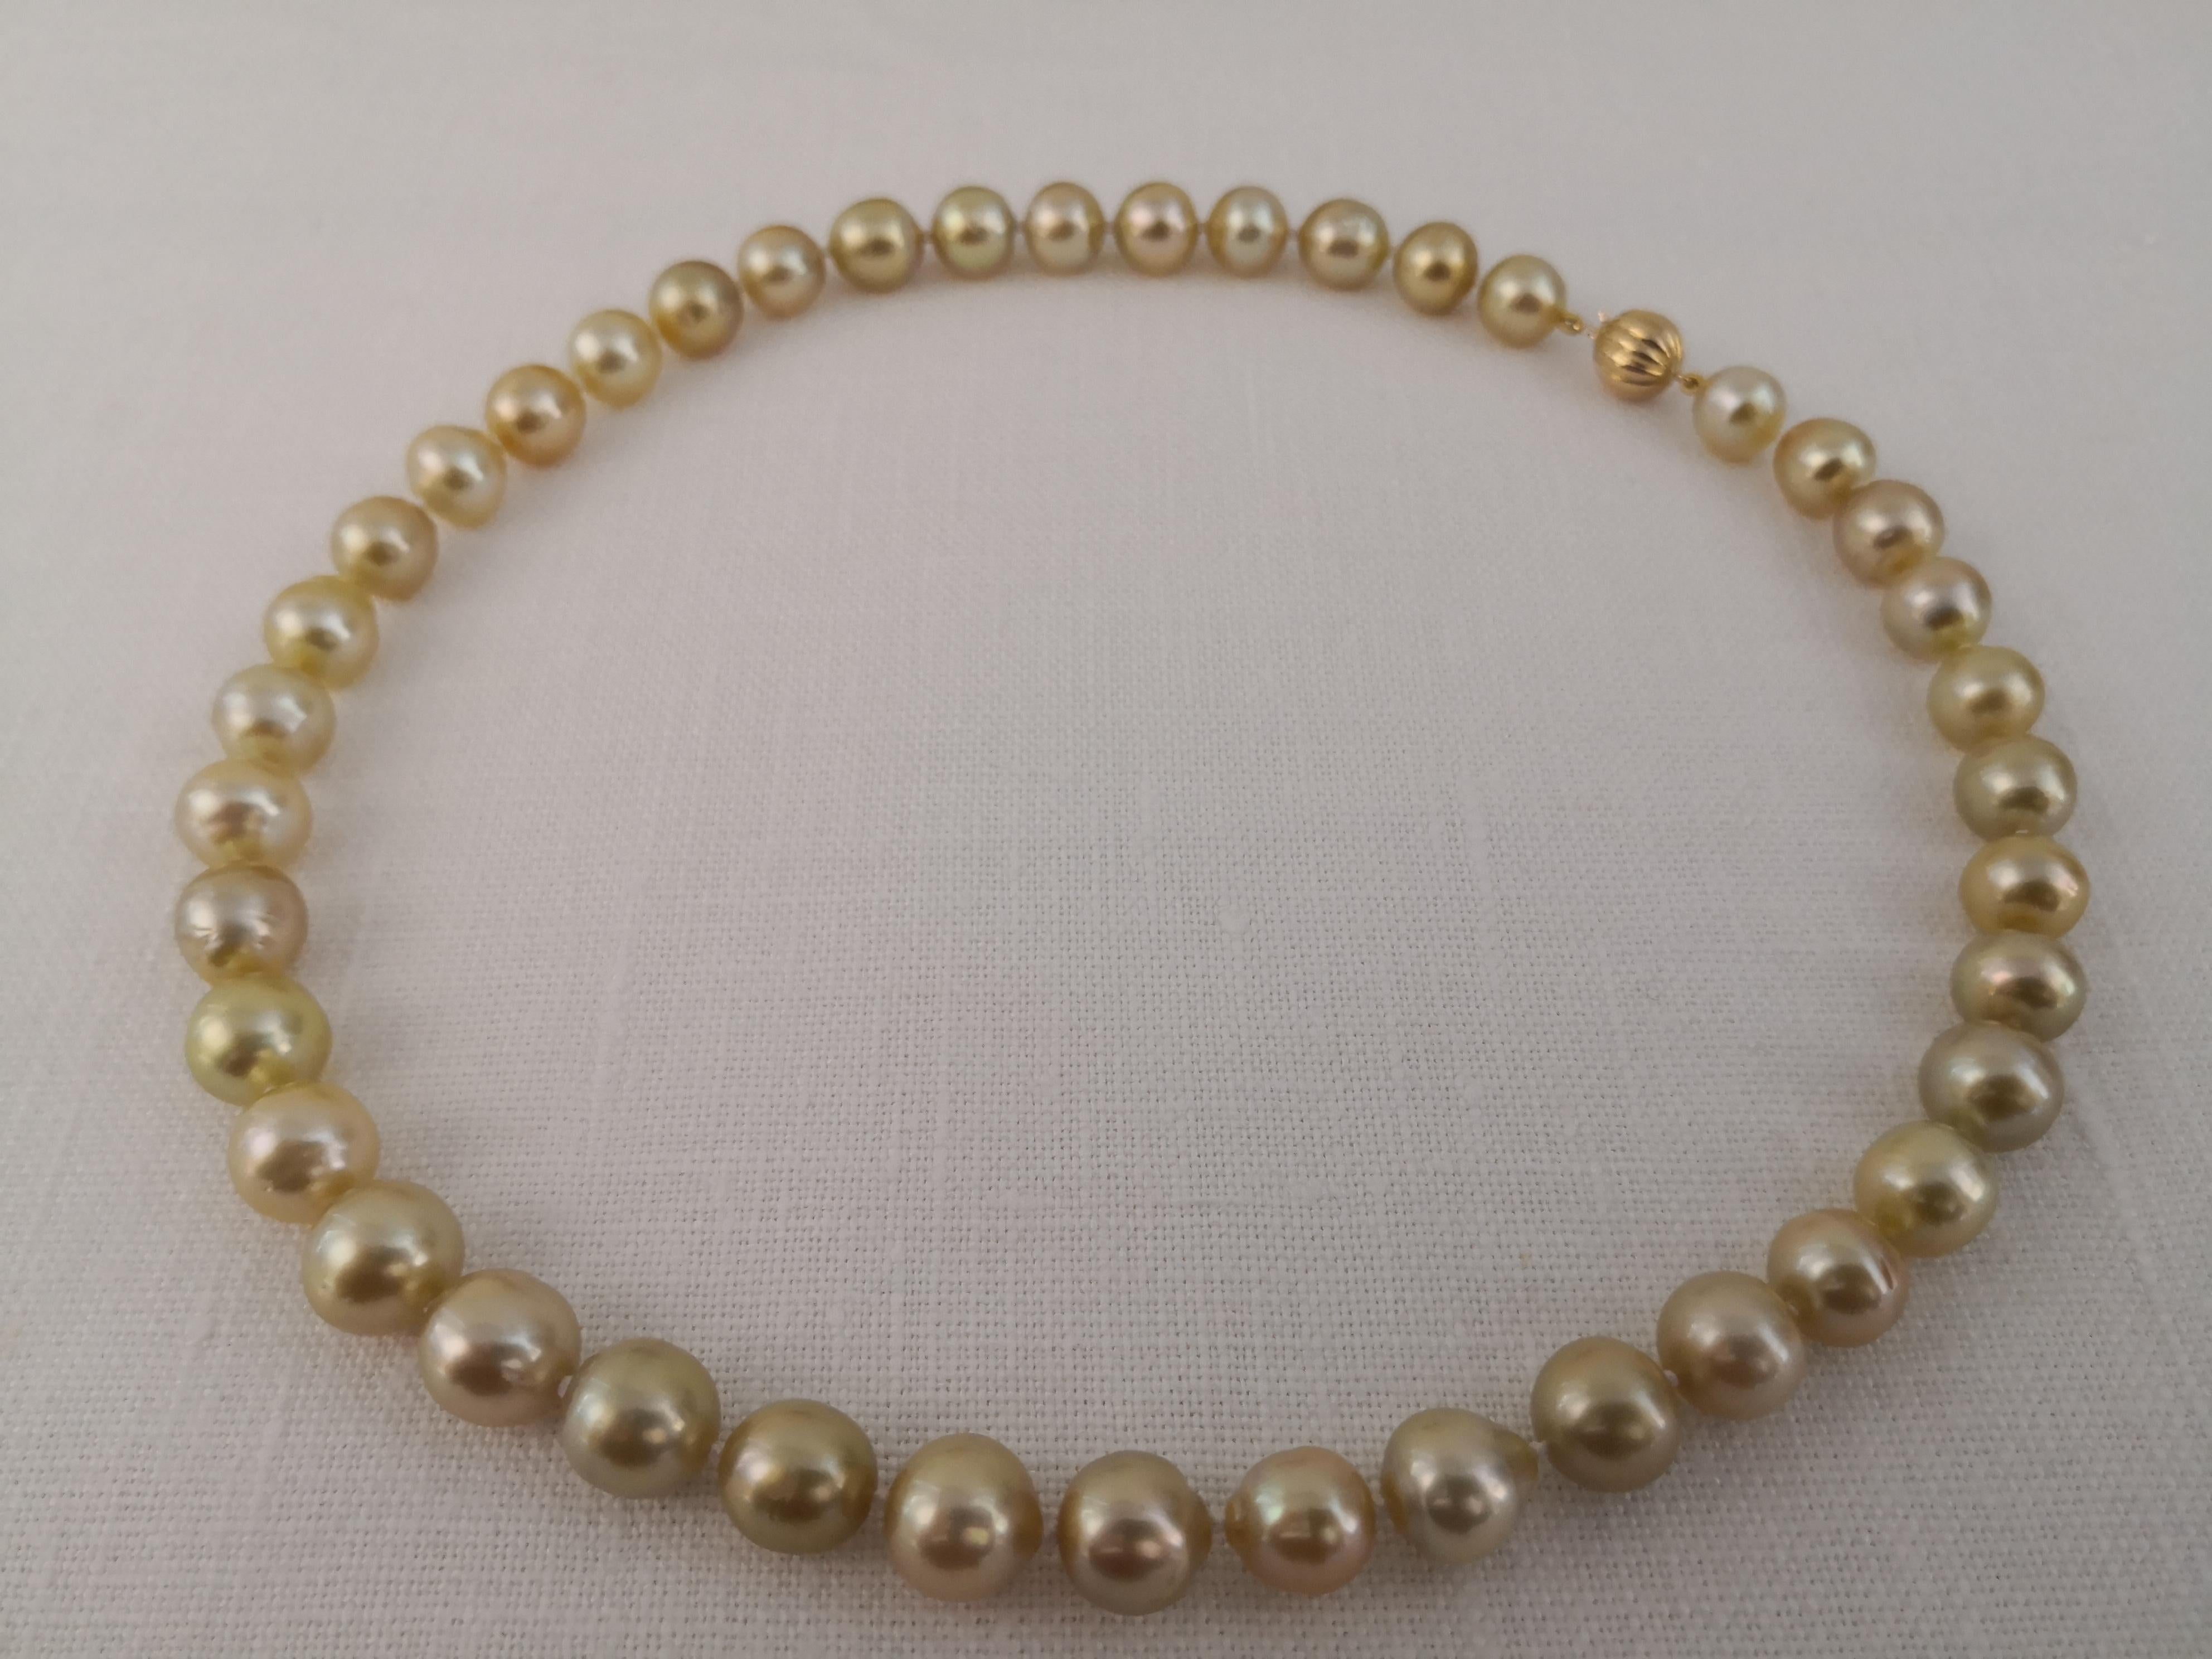 A Natural Color South Sea Pearls, from ocean waters.

- Size of Pearls 10-12 mm of diameter

- Pearls from Pinctada Maxima Oyster

- Origin: Indonesia ocean waters

- Natural multicolor White,  Cream, Golden, Champaign and mixed overtones

- Natural